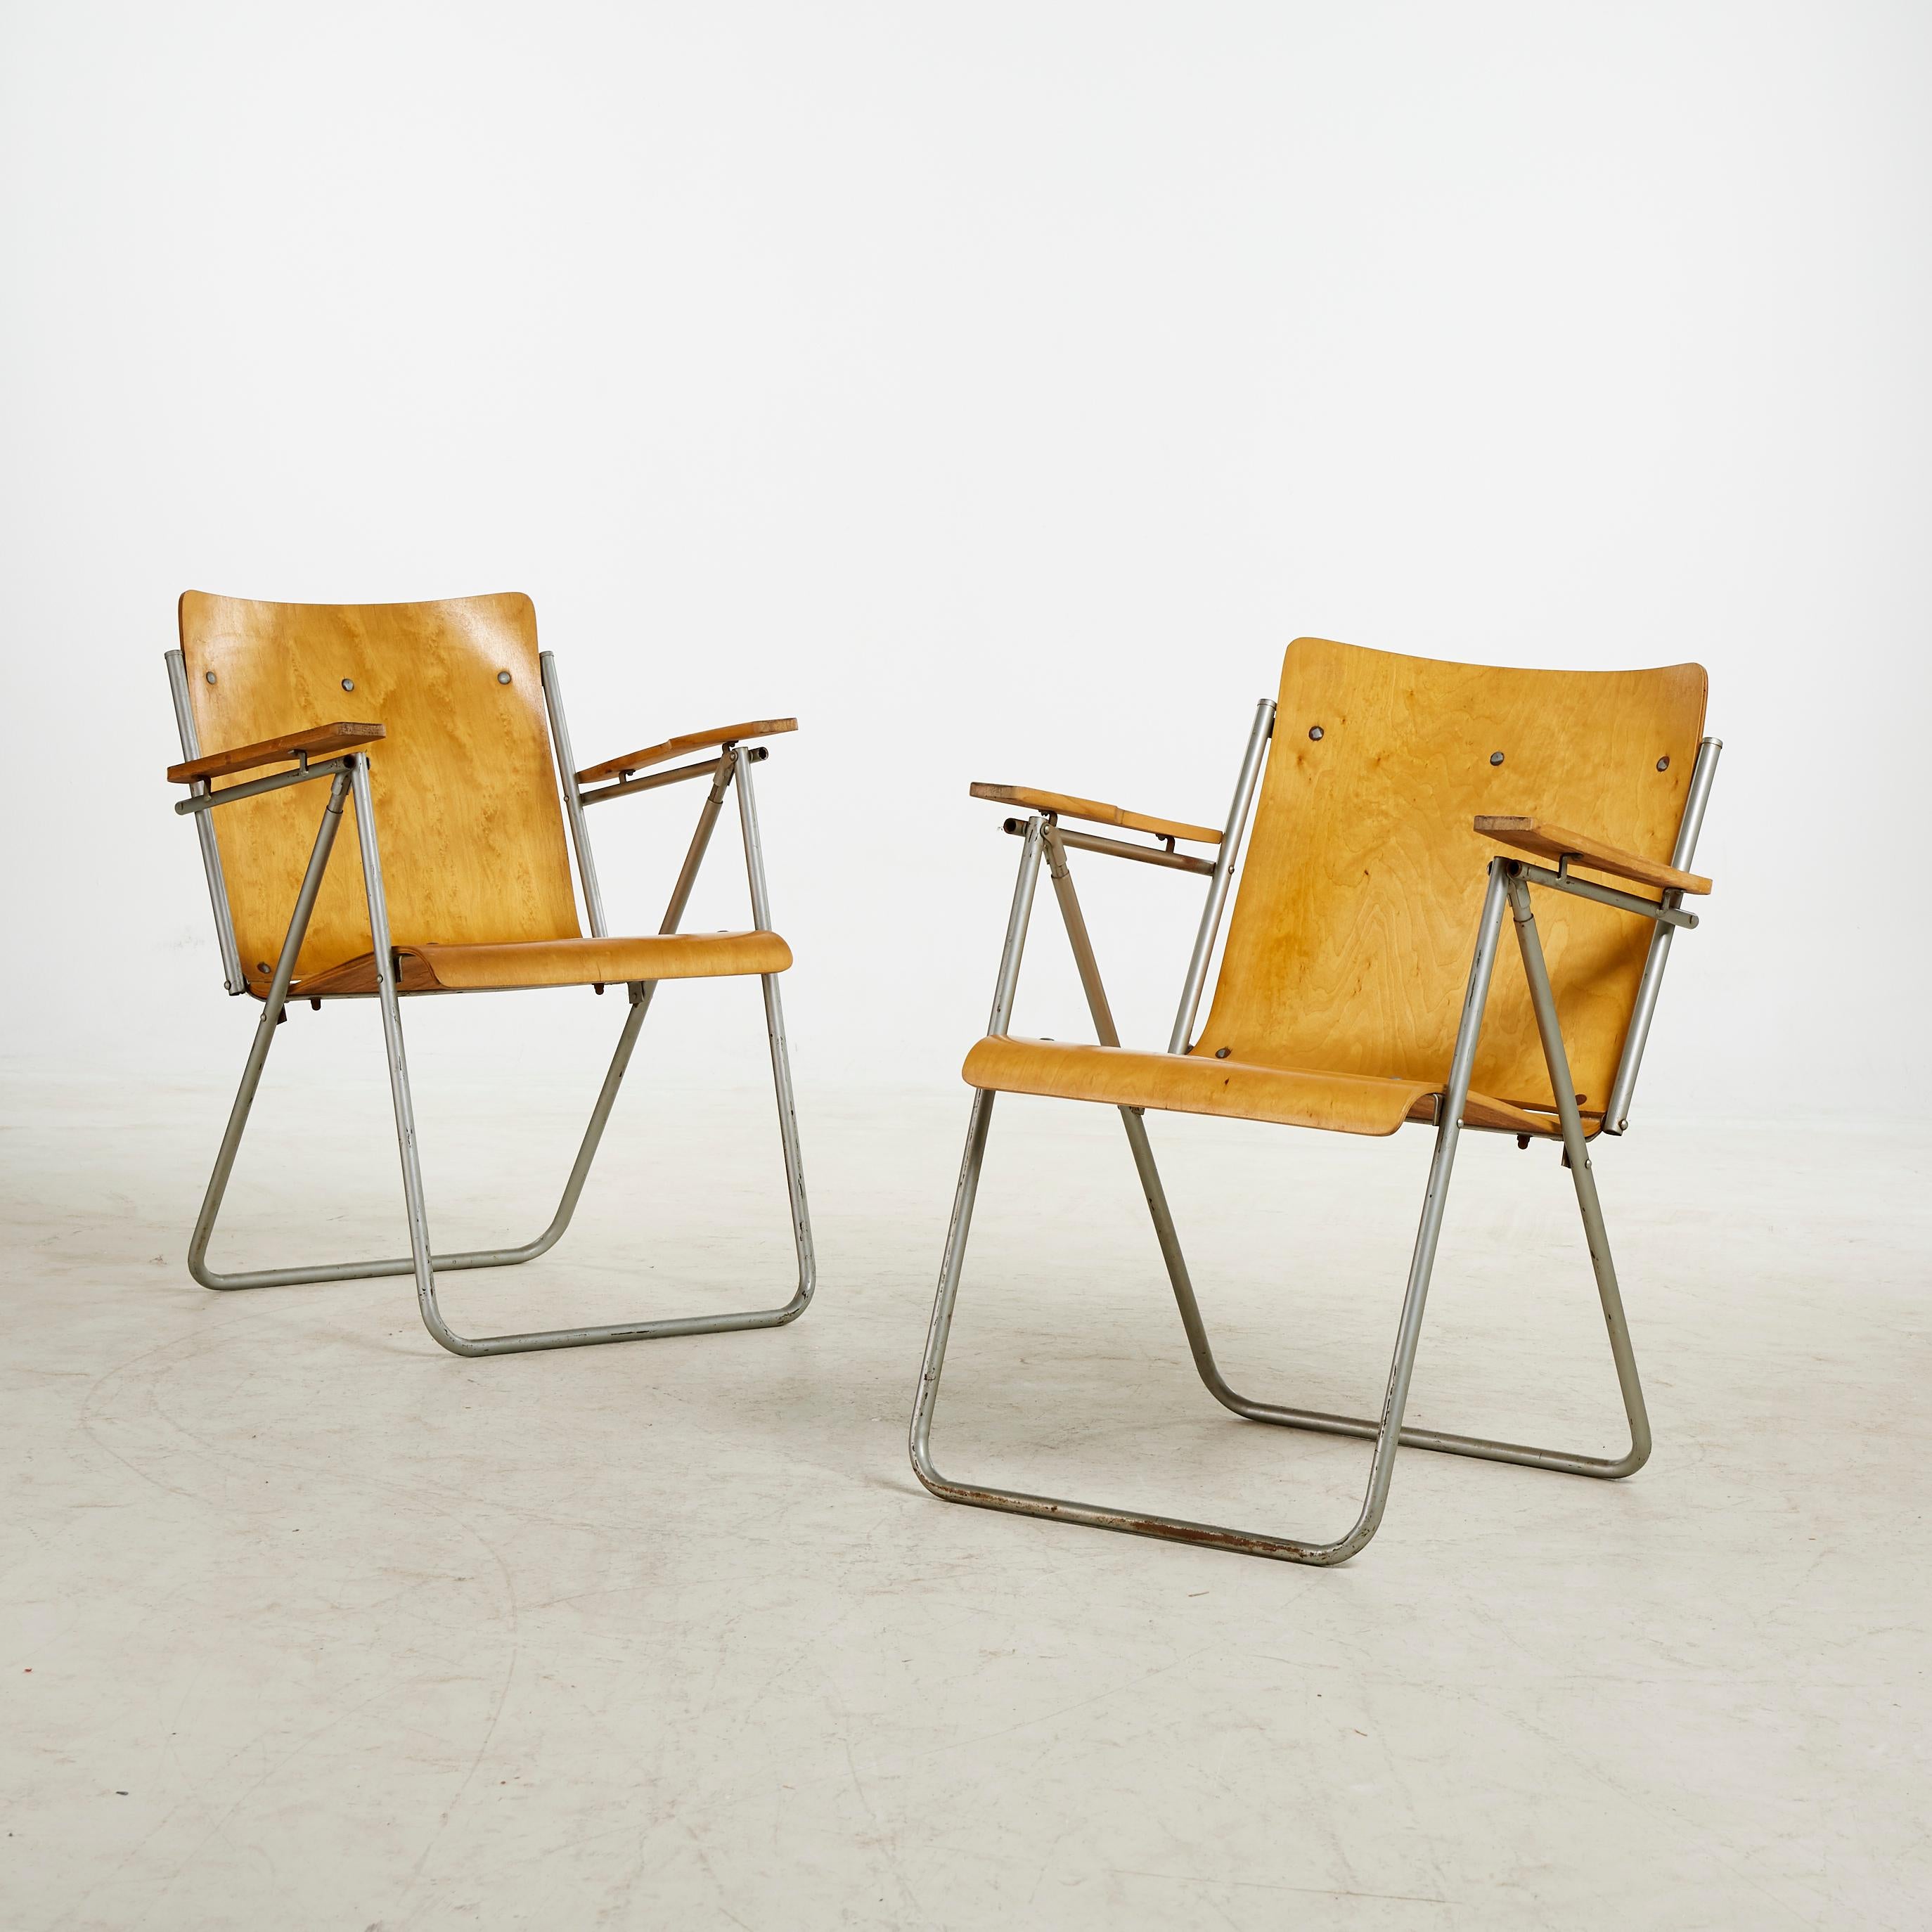 Early set of four folding chairs in chromed steel and original vegetal tanned leather, plus one folding table in chromed steel and Scandinavian pine, designed by Borge Lindau & Bo Lindekrantz and produced from the 1960s by Swedish Lammhults.

Plus